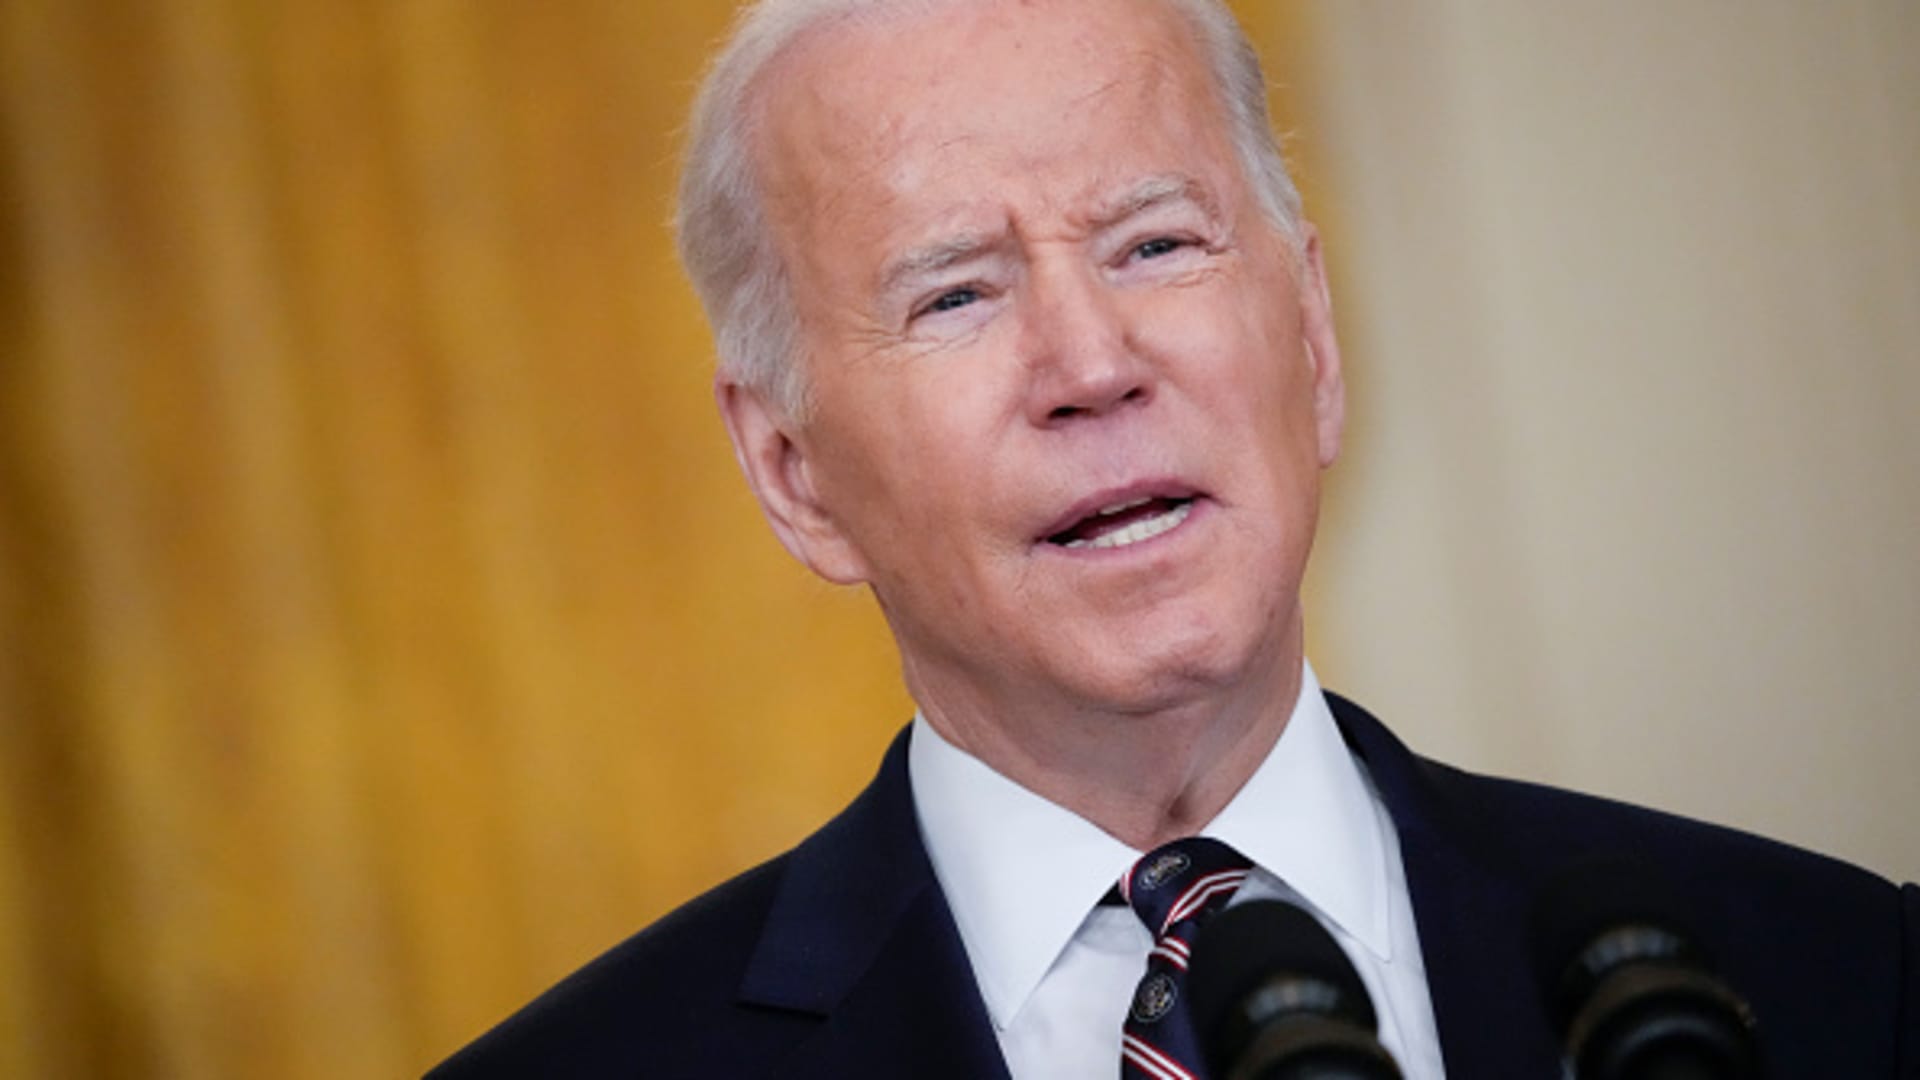 President Joe Biden speaks on developments in Ukraine and Russia, and announces sanctions against Russia, from the East Room of the White House February 22, 2022 in Washington, DC.